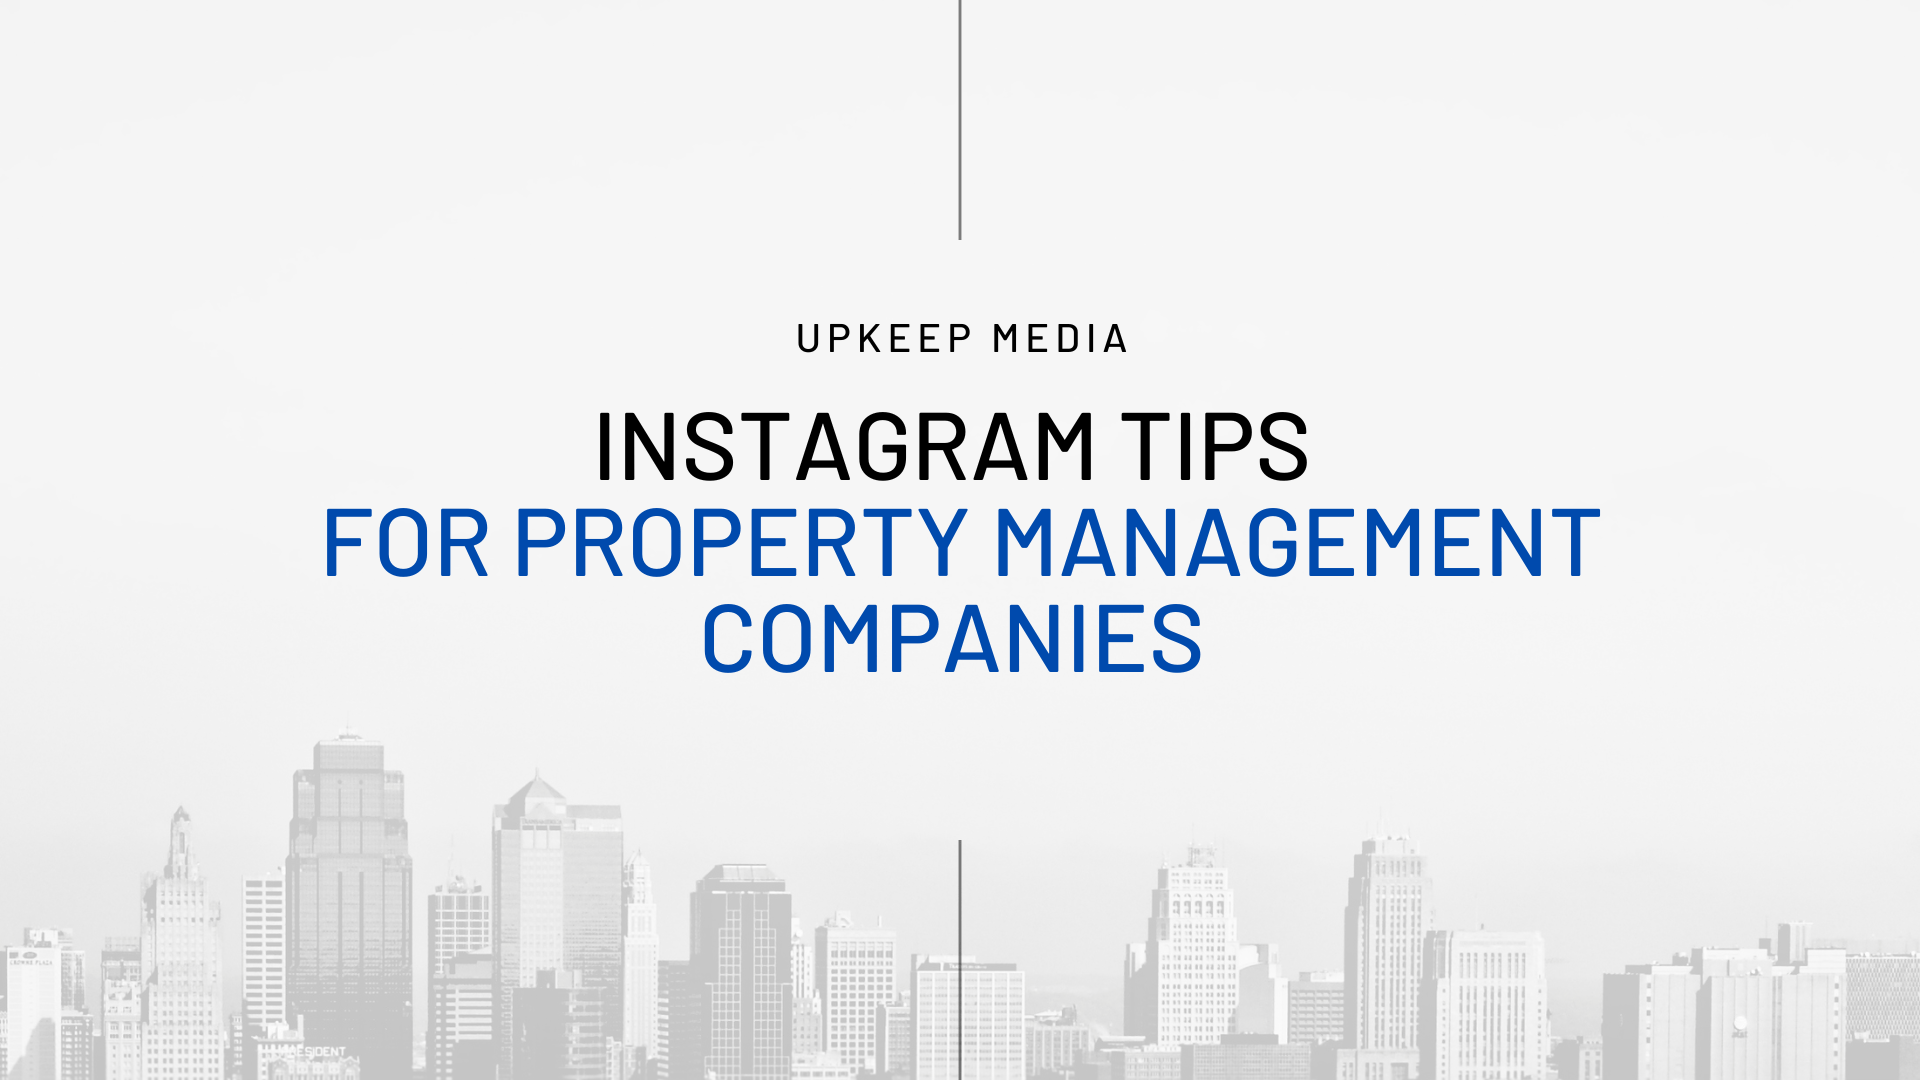 Essential Tips for Instagram – A Guide for Property Managers